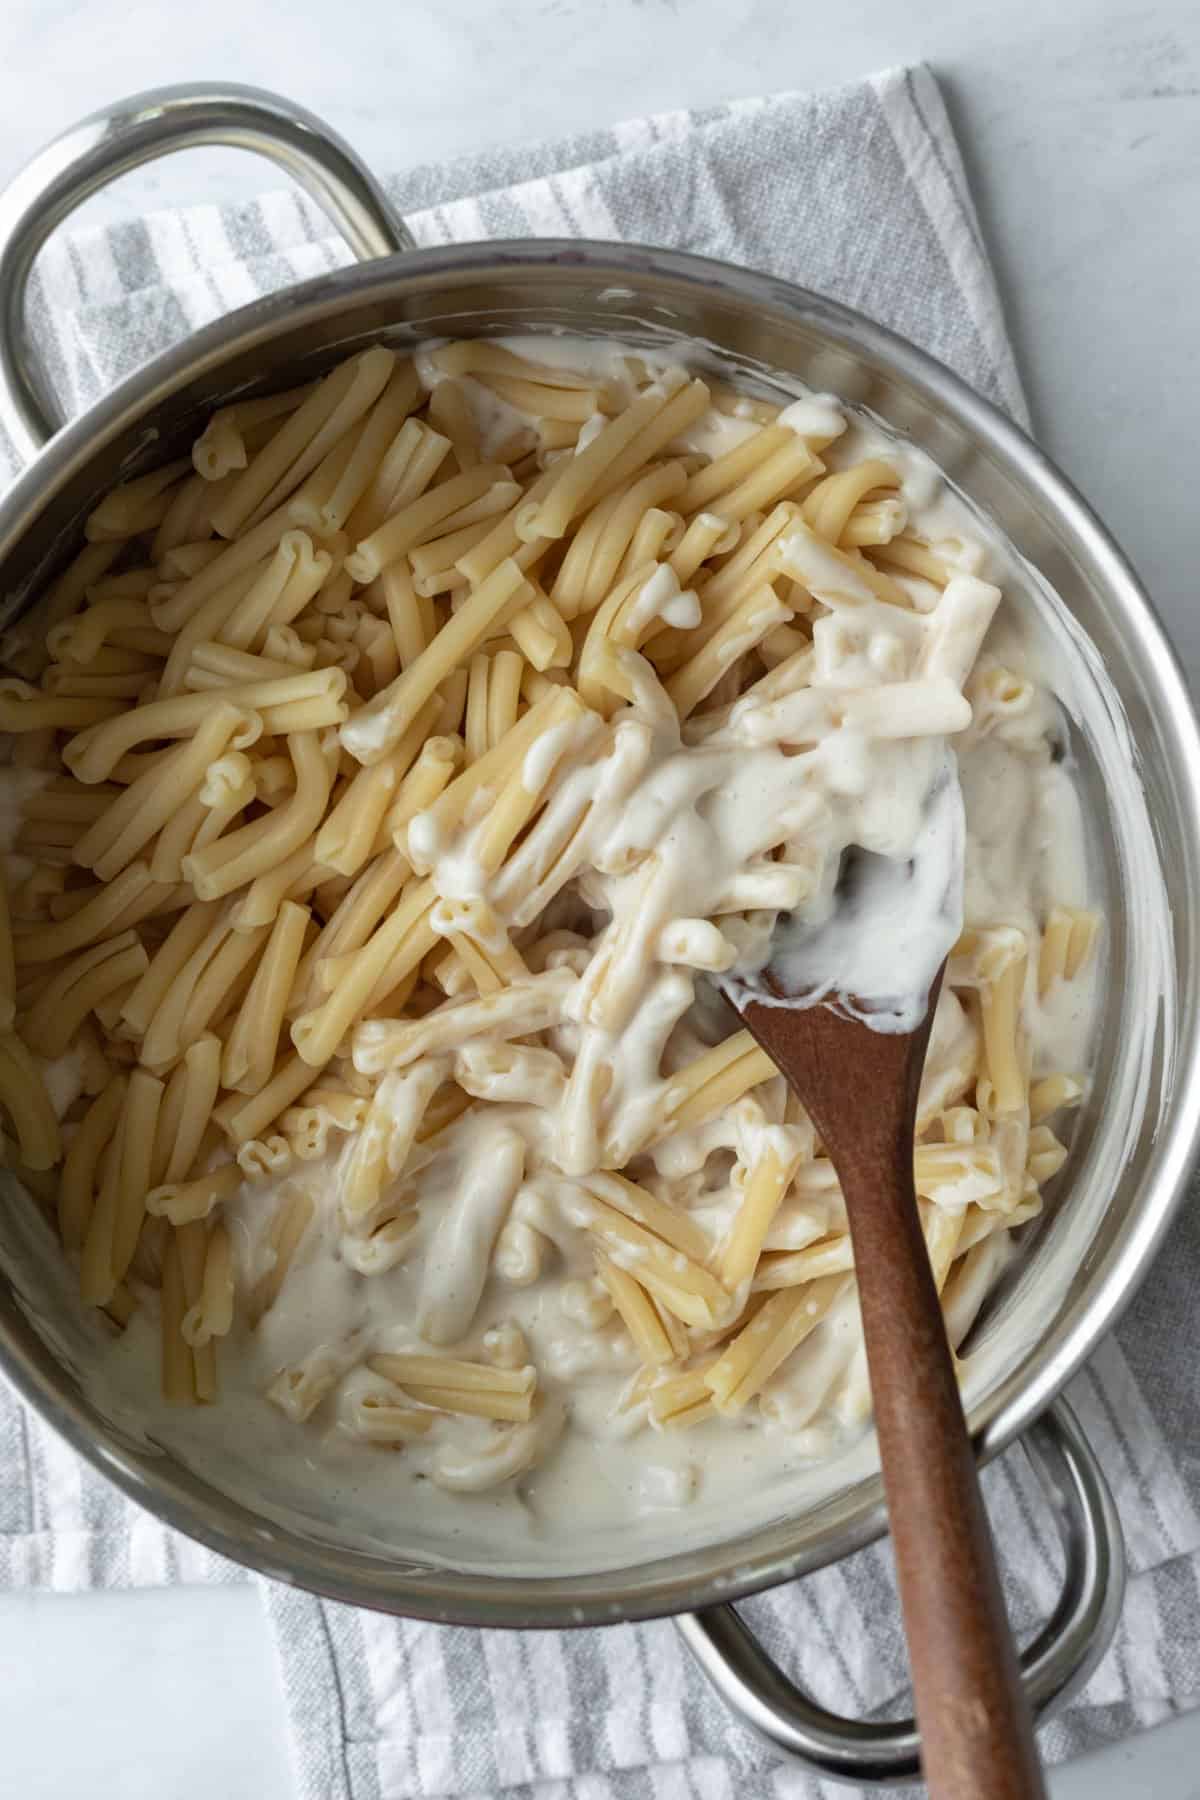 tossing pasta with creamy lemon sauce in a pot.